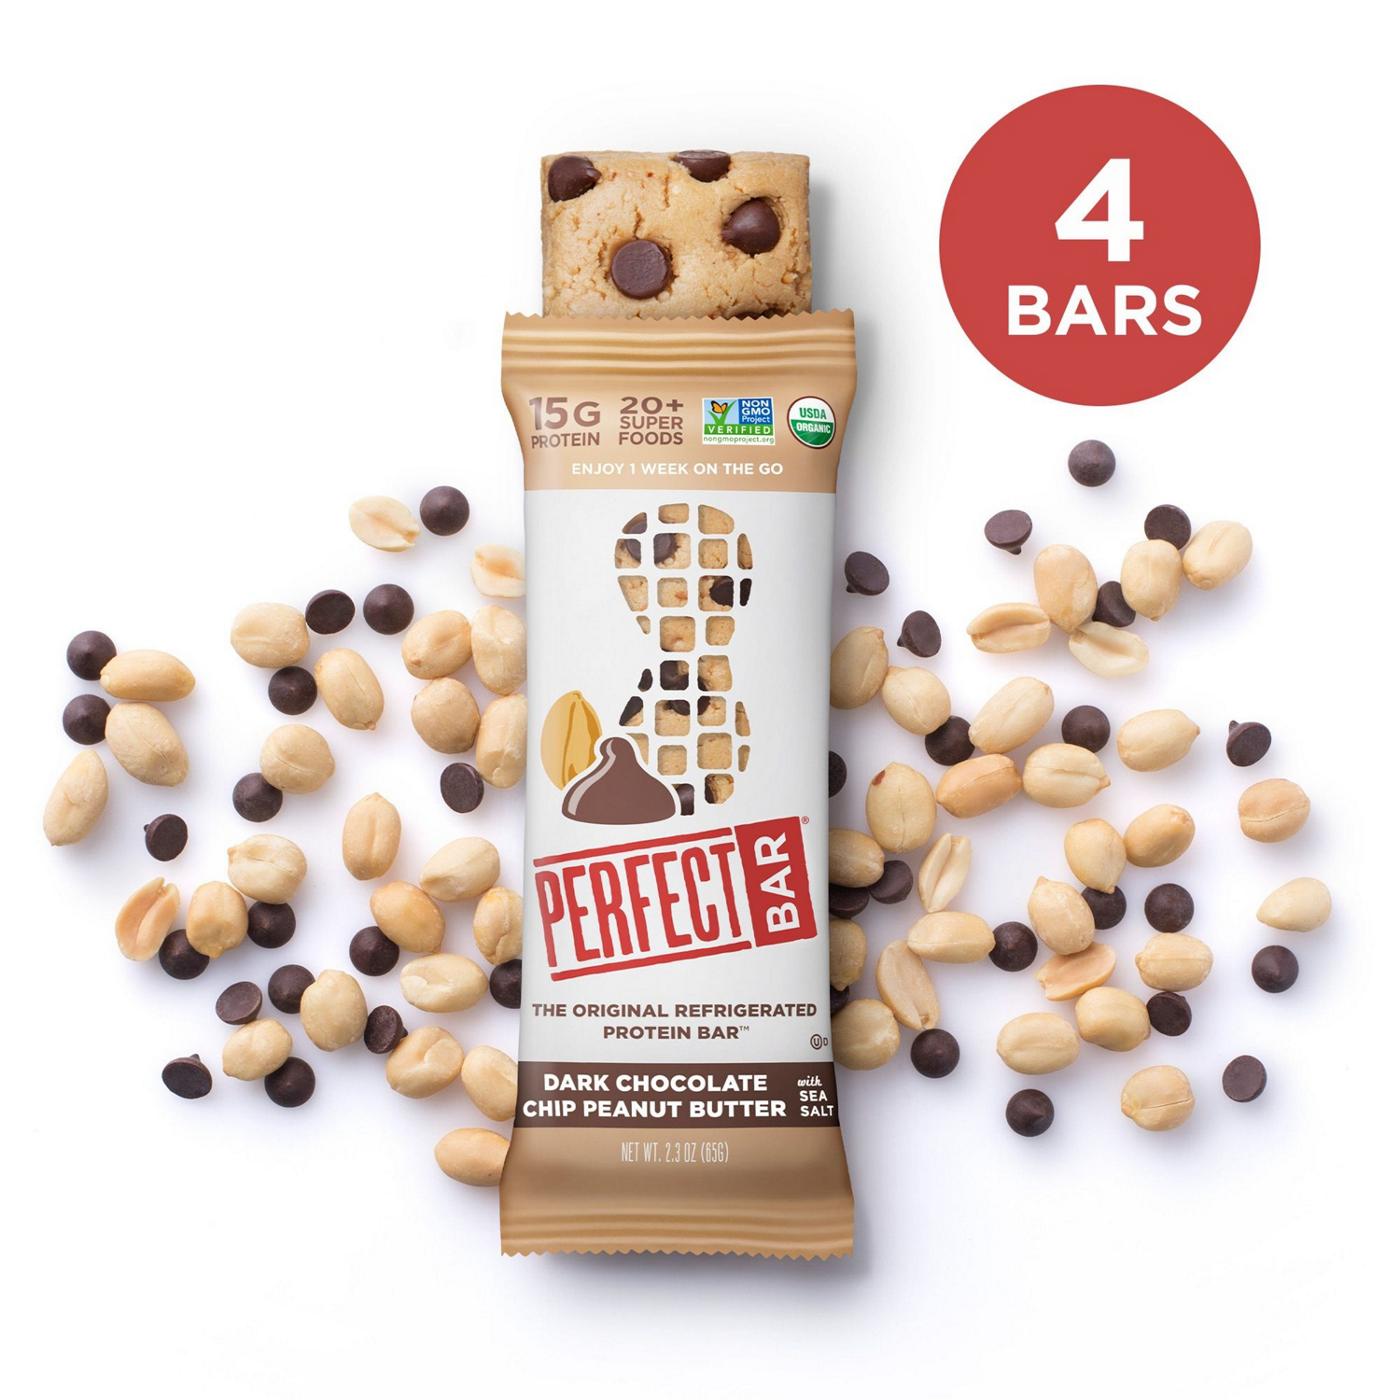 Perfect Bar 15g Protein Bars - Dark Chocolate Chip Peanut Butter; image 4 of 7